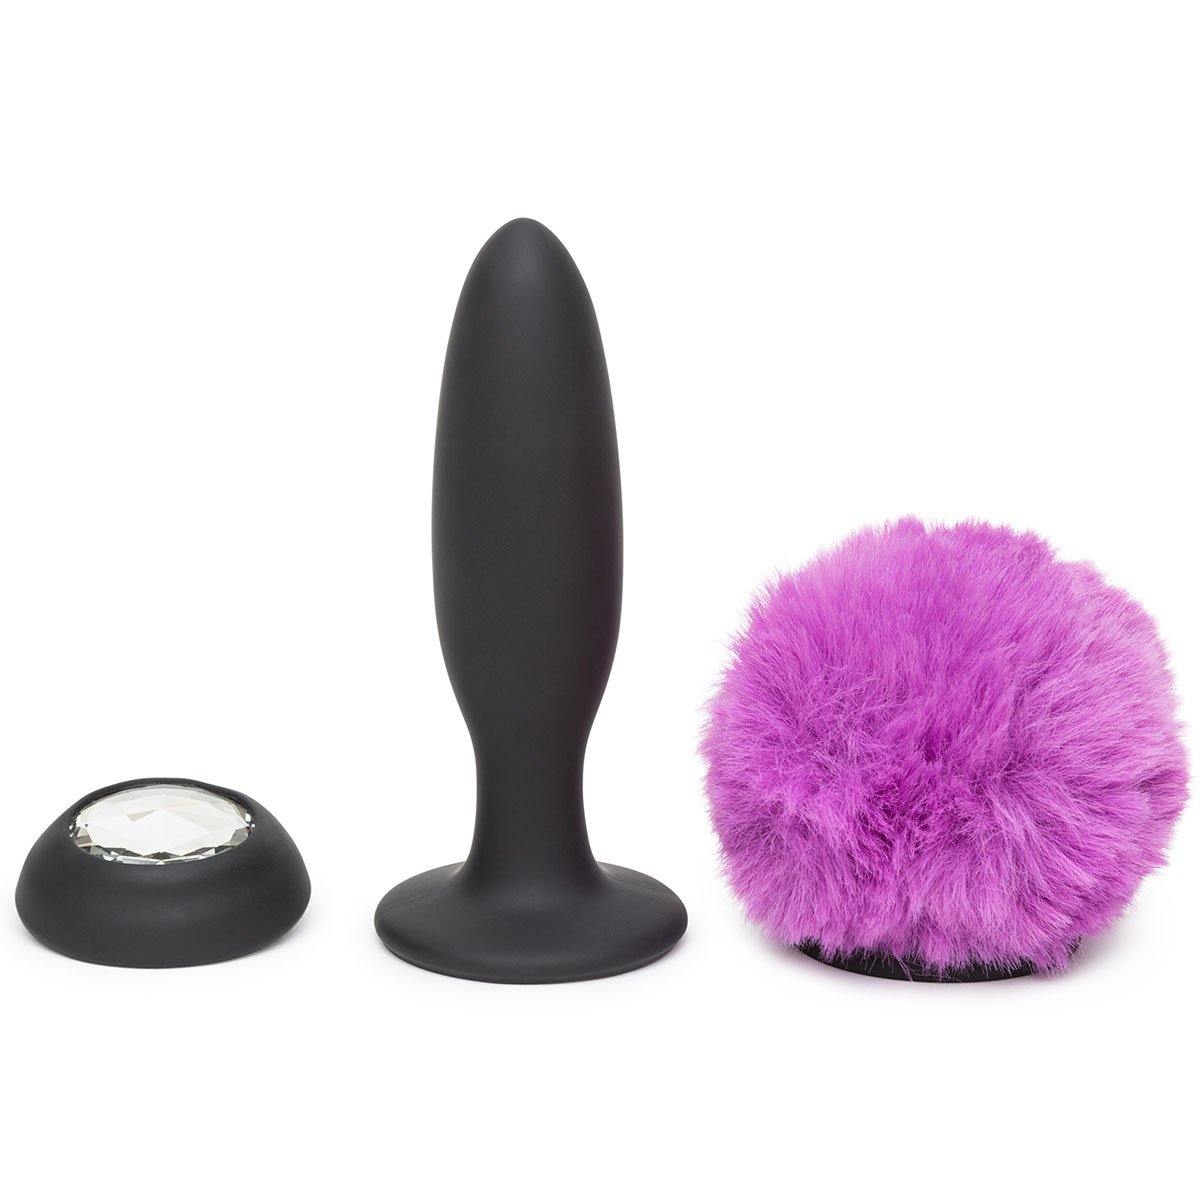 Happy Rabbit Butt Plug Black-Purple Tail Small Rechargeable - Buy At Luxury Toy X - Free 3-Day Shipping